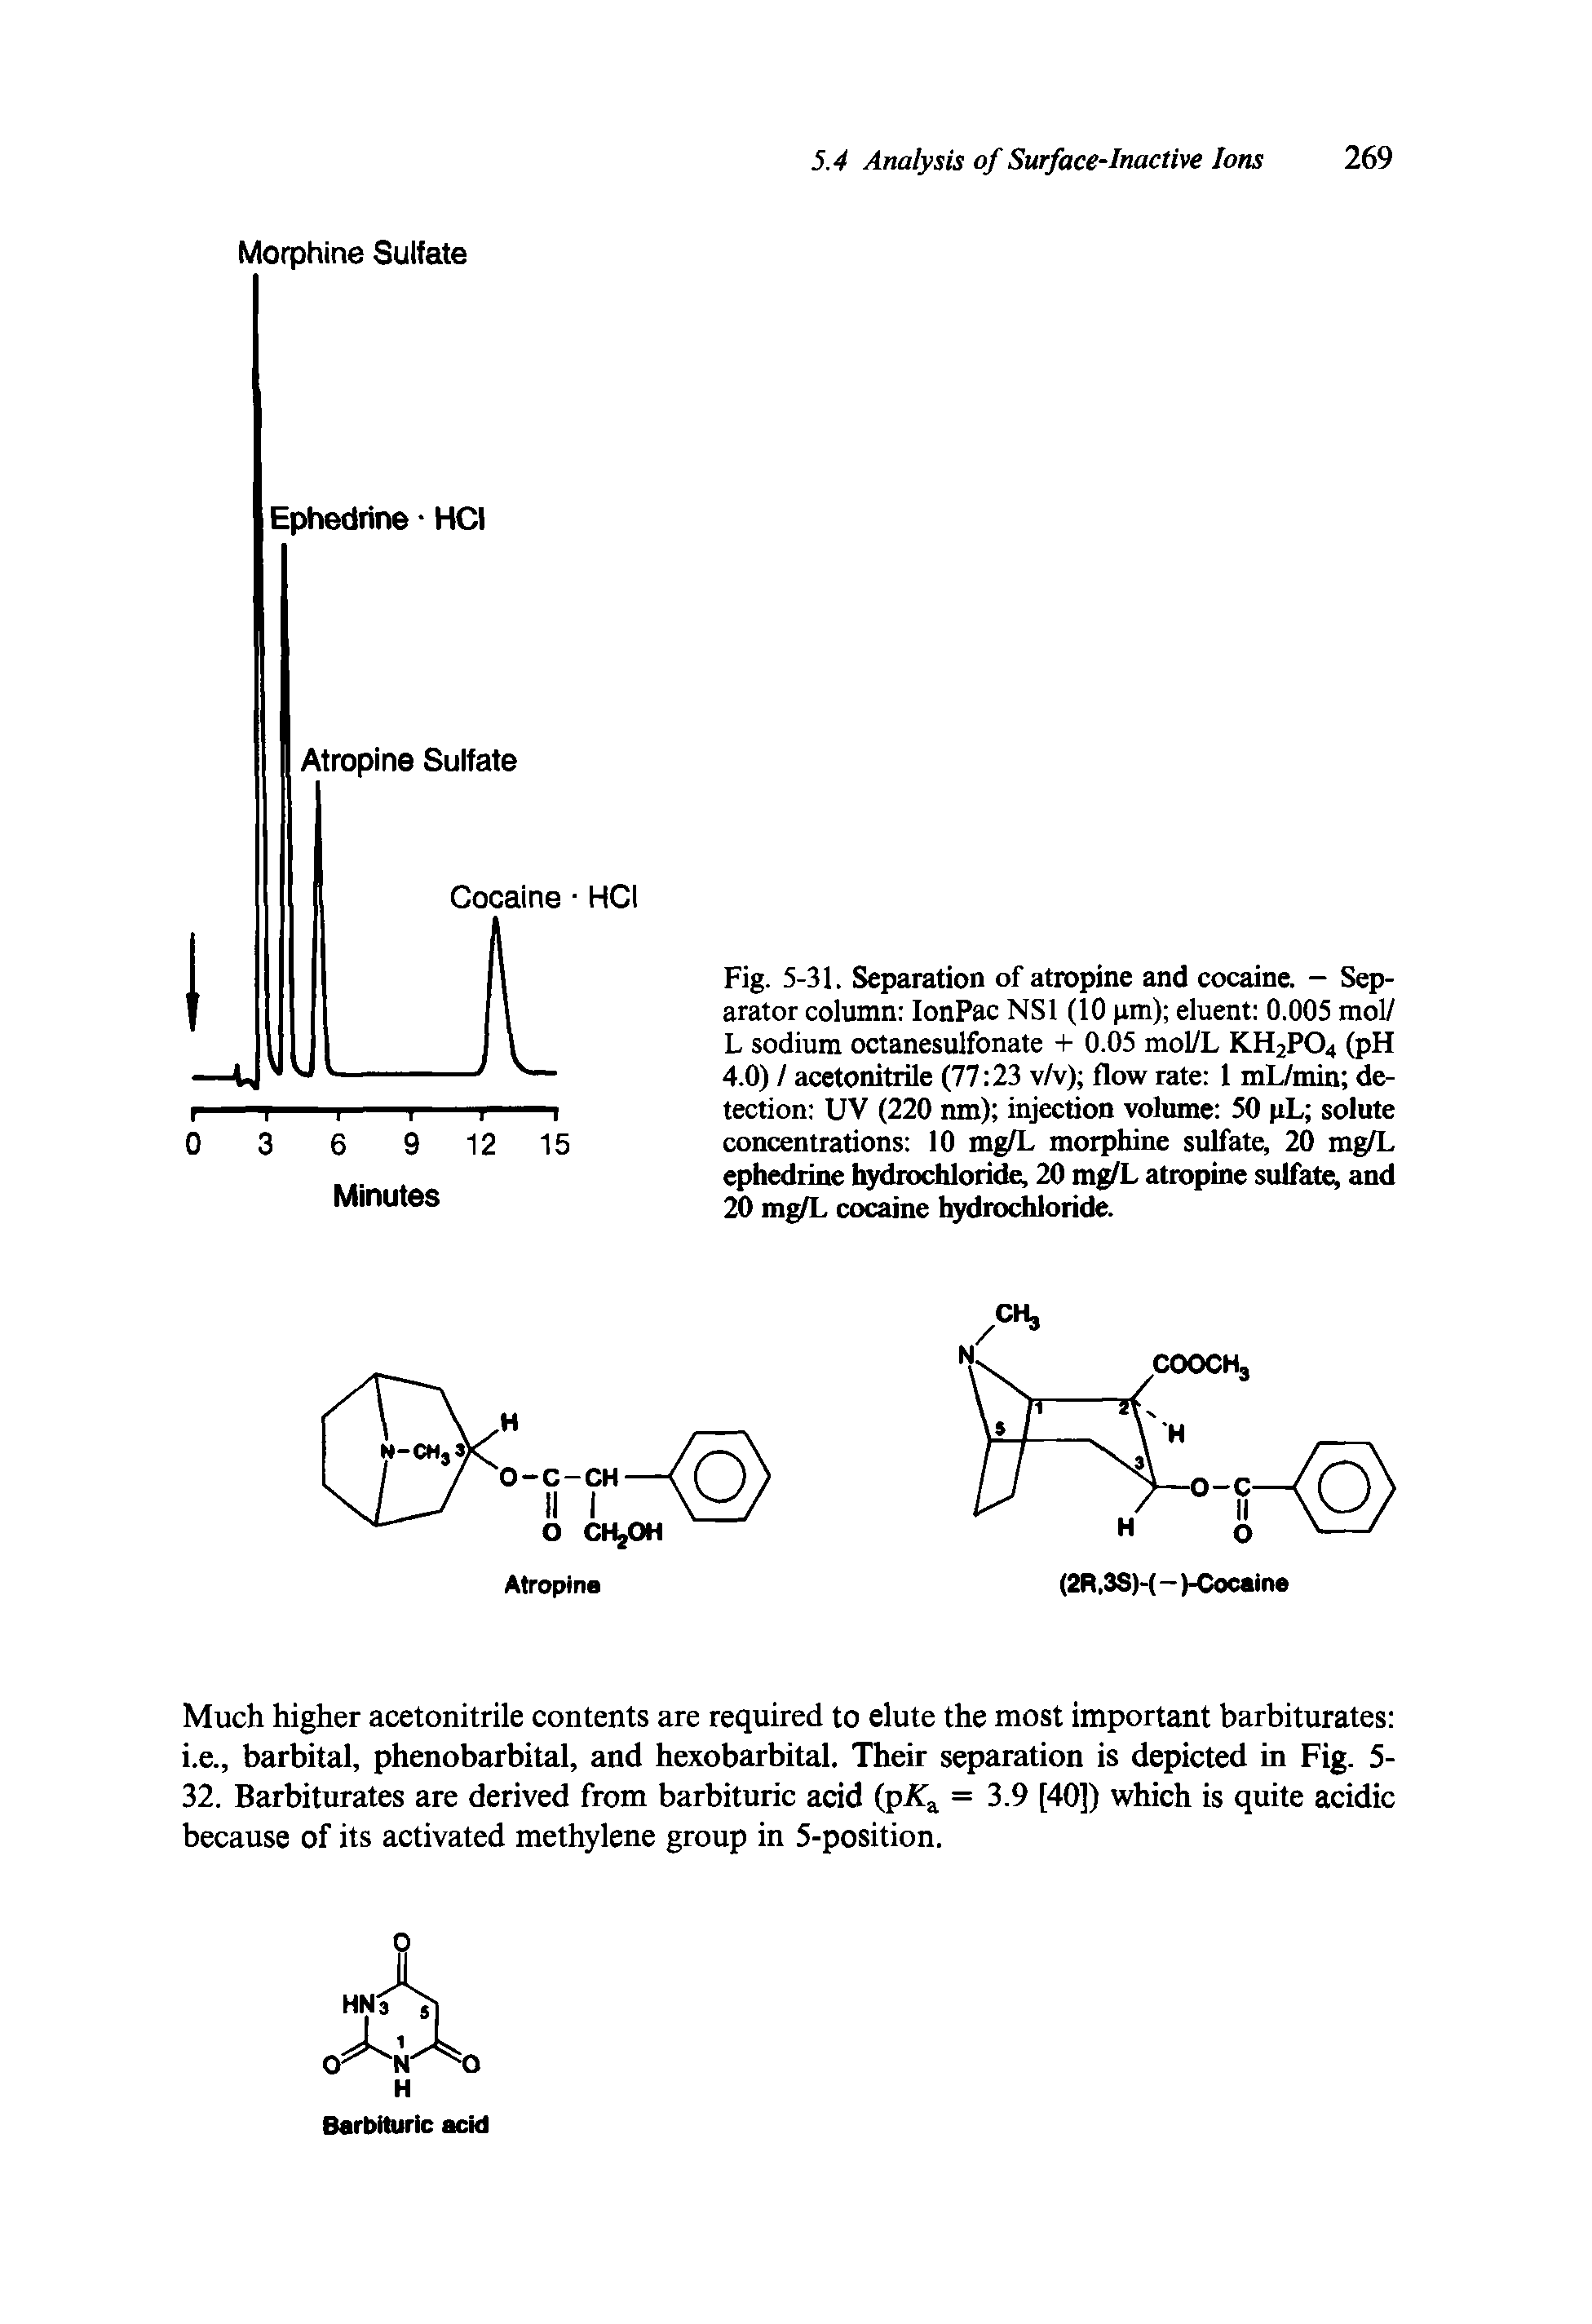 Fig. 5-31. Separation of atropine and cocaine. - Separator column IonPac NS1 (10 pm) eluent 0.005 mol/ L sodium octanesulfonate + 0.05 mol/L KH2P04 (pH 4.0) / acetonitrile (77 23 v/v) flow rate 1 mL/min detection UV (220 nm) injection volume 50 pL solute concentrations 10 mg/L morphine sulfate, 20 mg/L ephedrine hydrochloride, 20 mg/L atropine sulfate, and 20 mg/L cocaine hydrochloride.